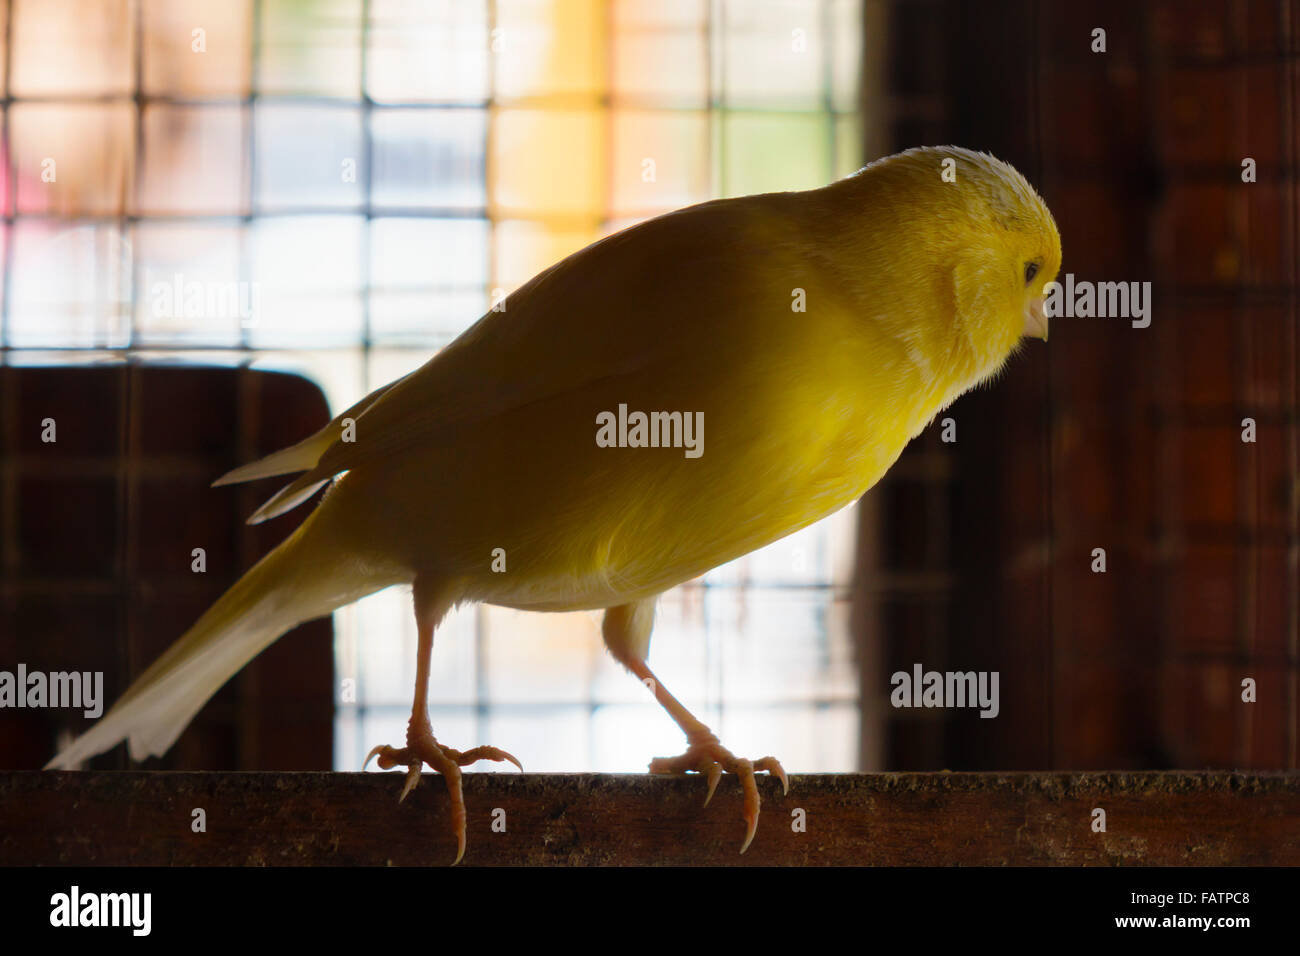 Tenerife, Canary Islands - canary in a cage. Stock Photo